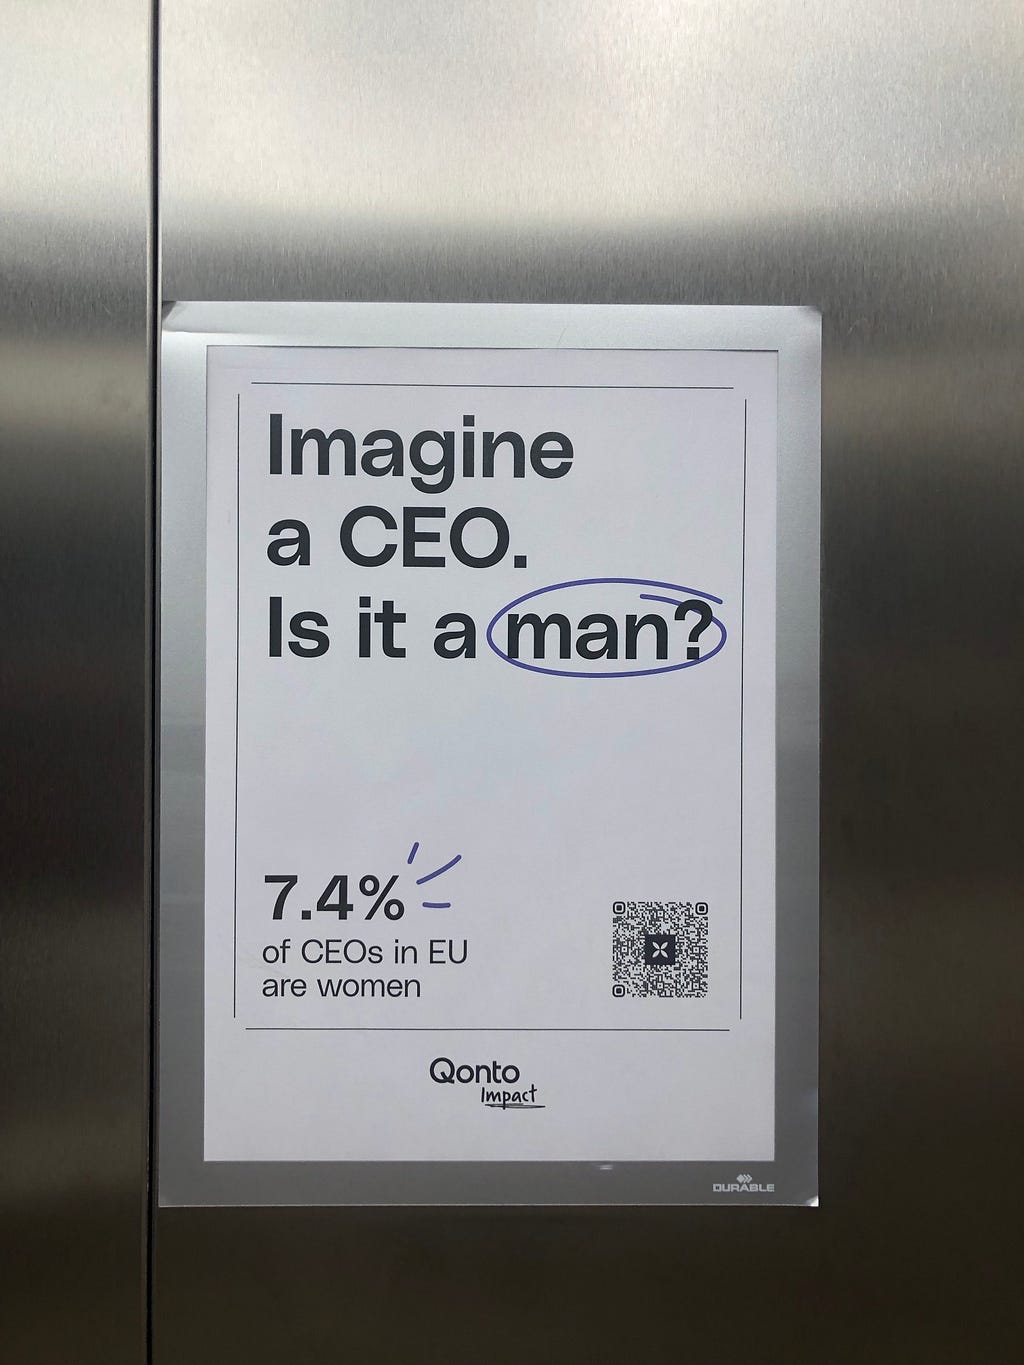 Poster on an elevator wall with an eye-catching headline: “Imagine a CEO.” The next line reads: “Is it a man?” The final line reads: “7.4% of CEOs in EU are women”. The poster is signed “Qonto Impact”.